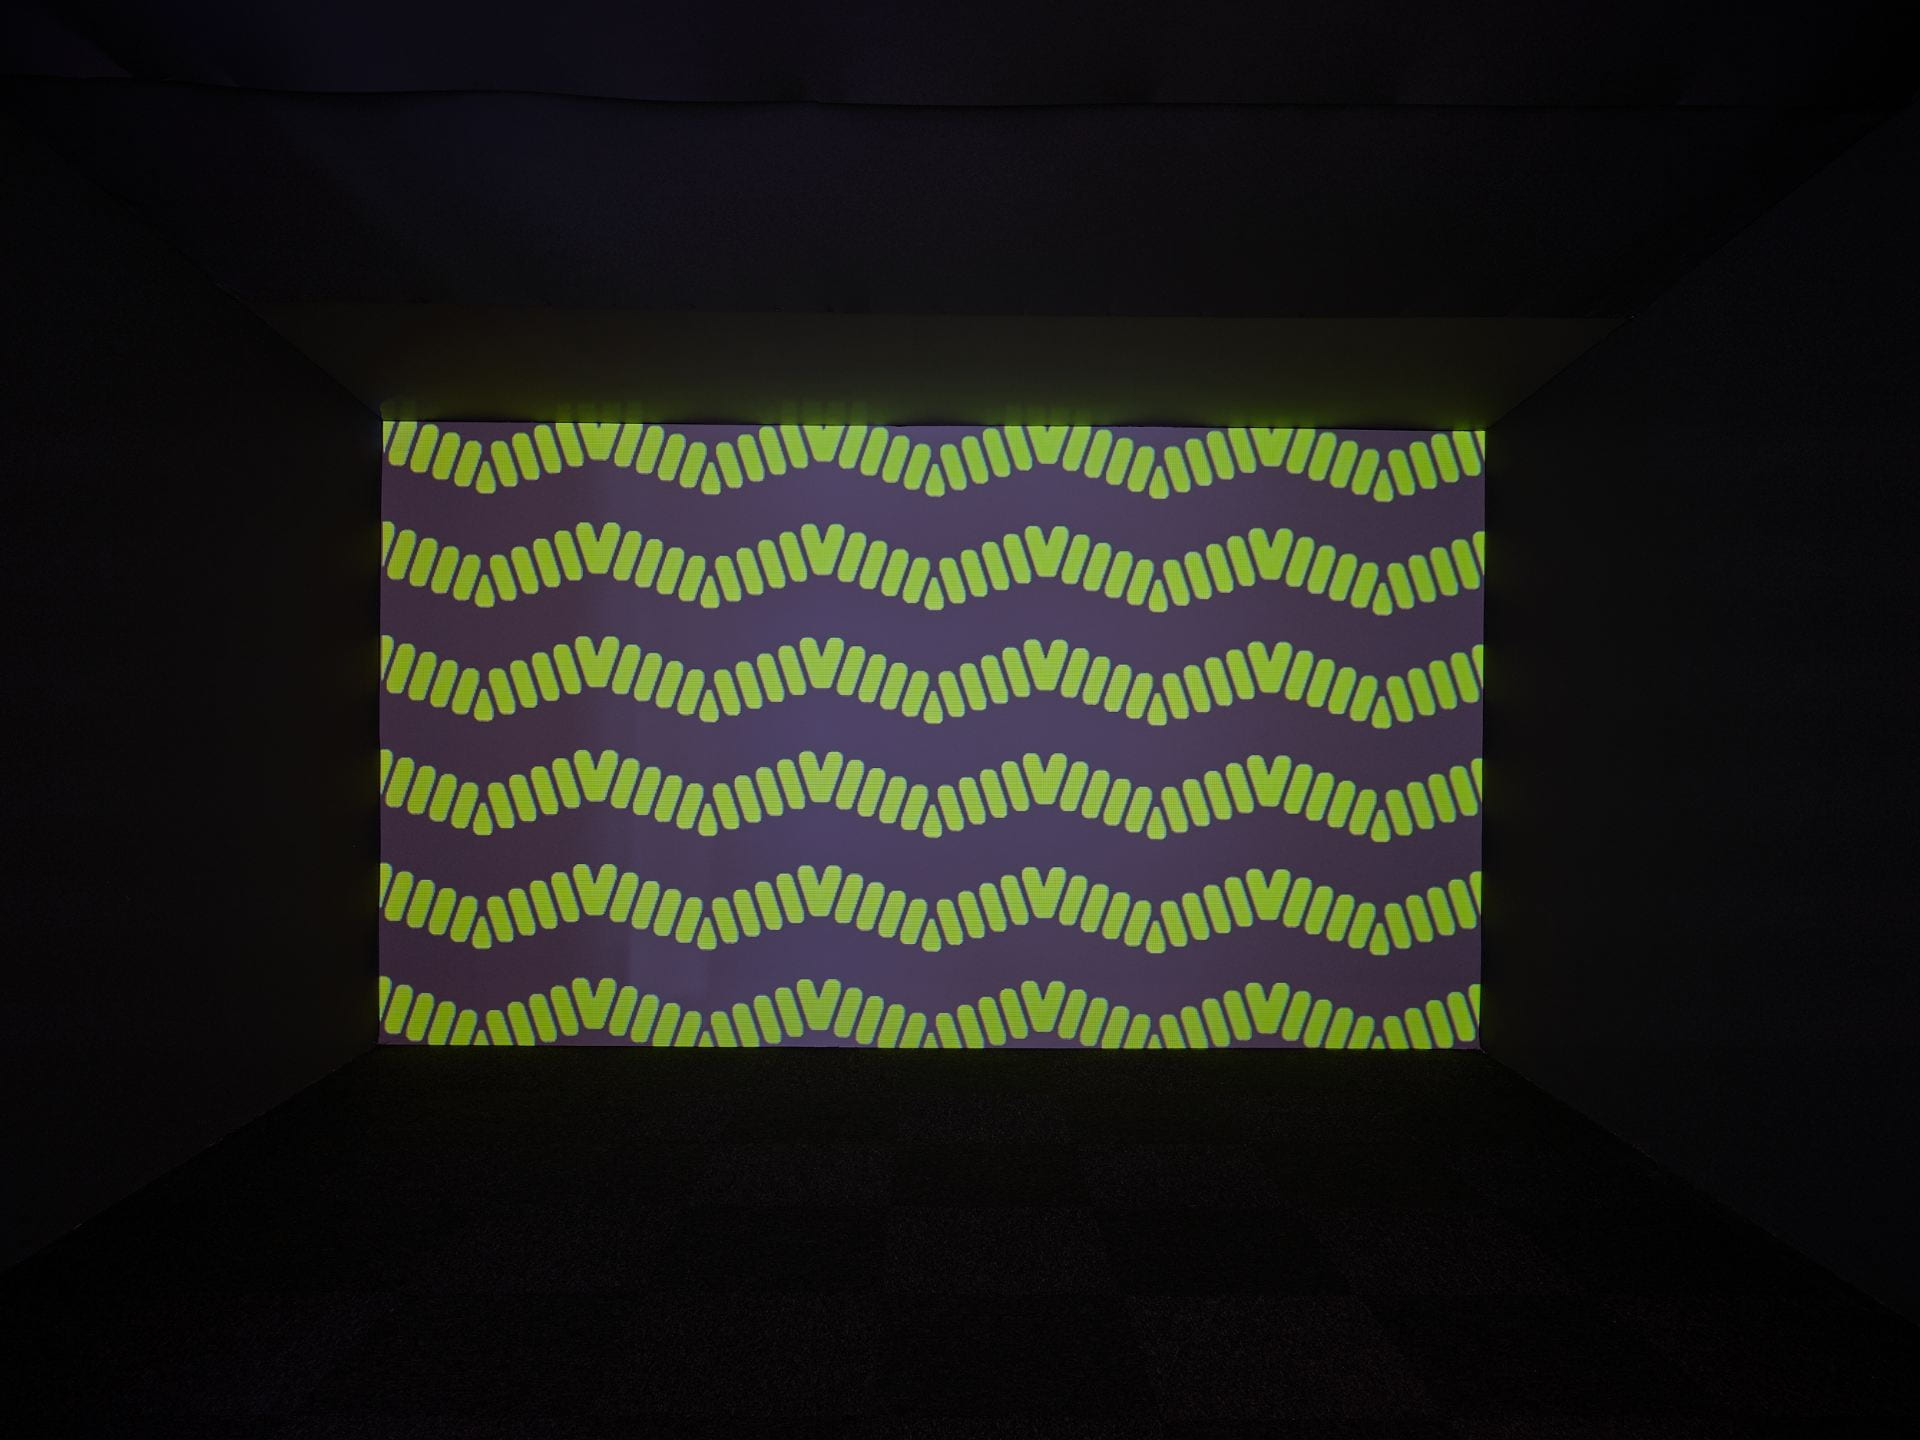 A film work filled with bright green patterns is contained within a dark film booth in the gallery space.